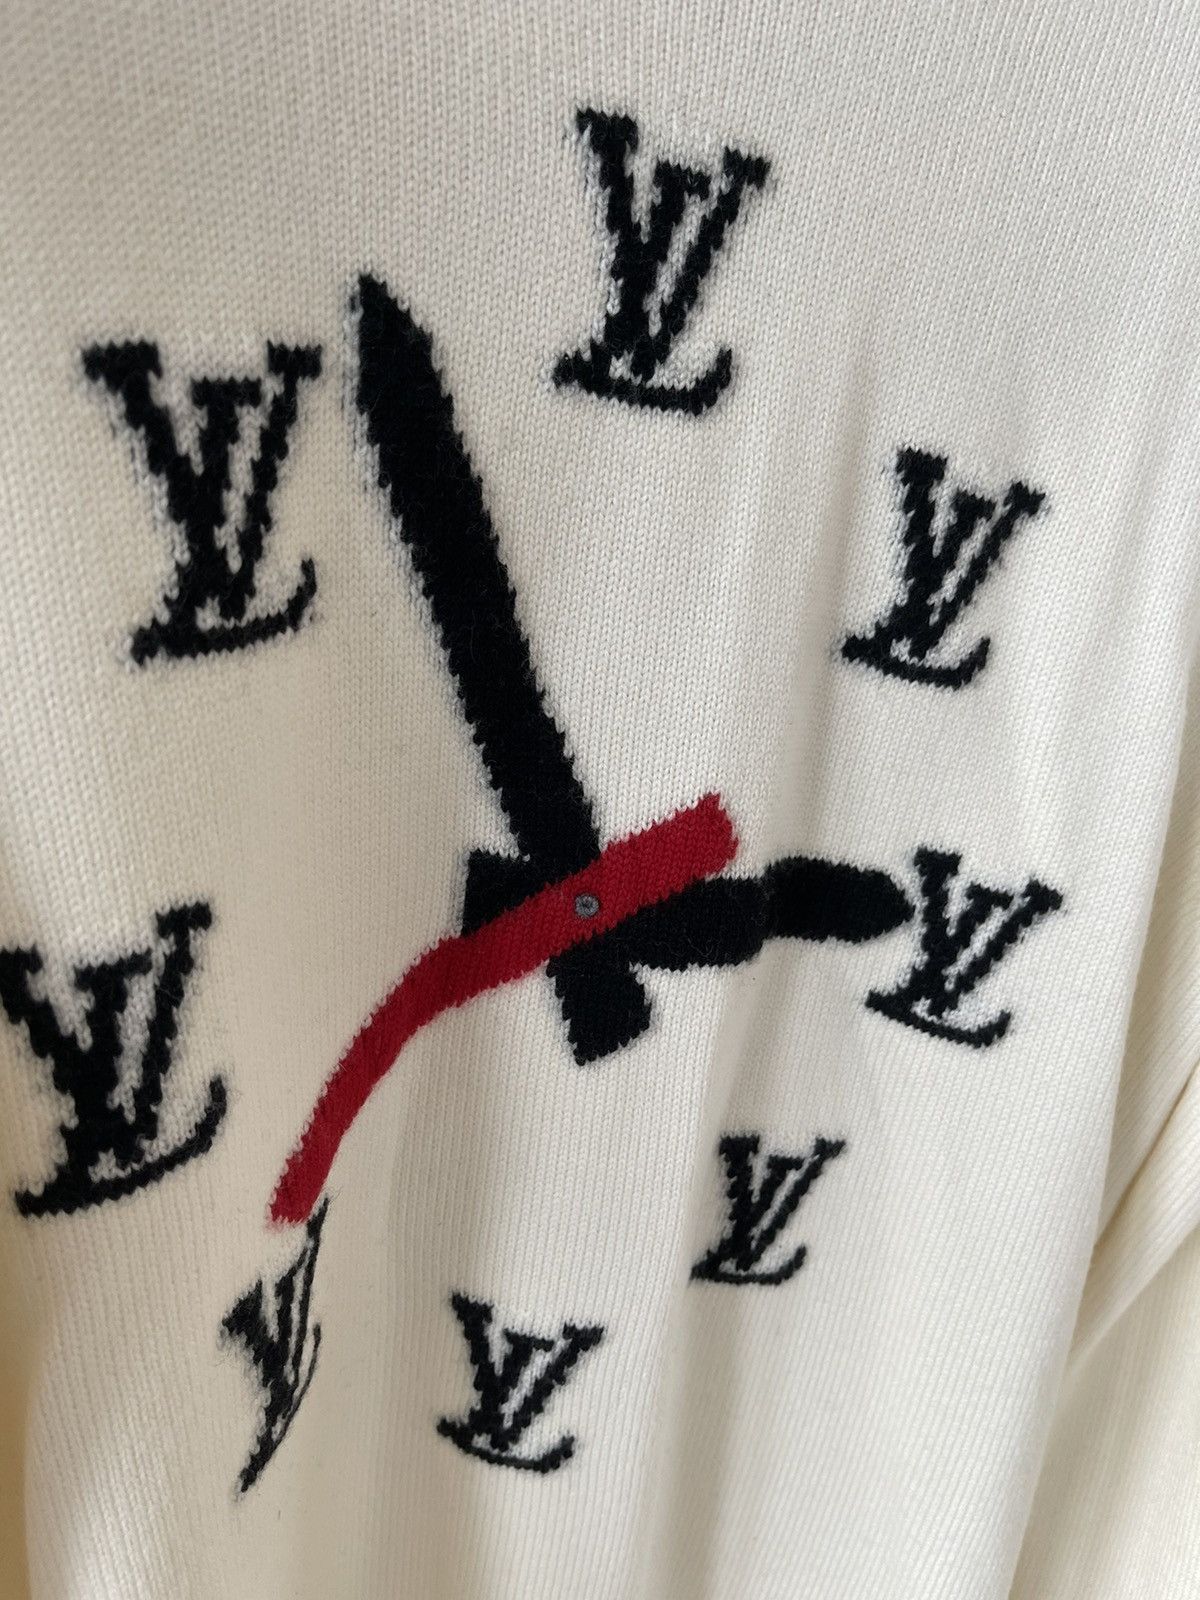 Louis Vuitton 2019 Embellished Globe Intarsia Sweater w/ Tags - Grey  Sweaters, Clothing - LOU289642